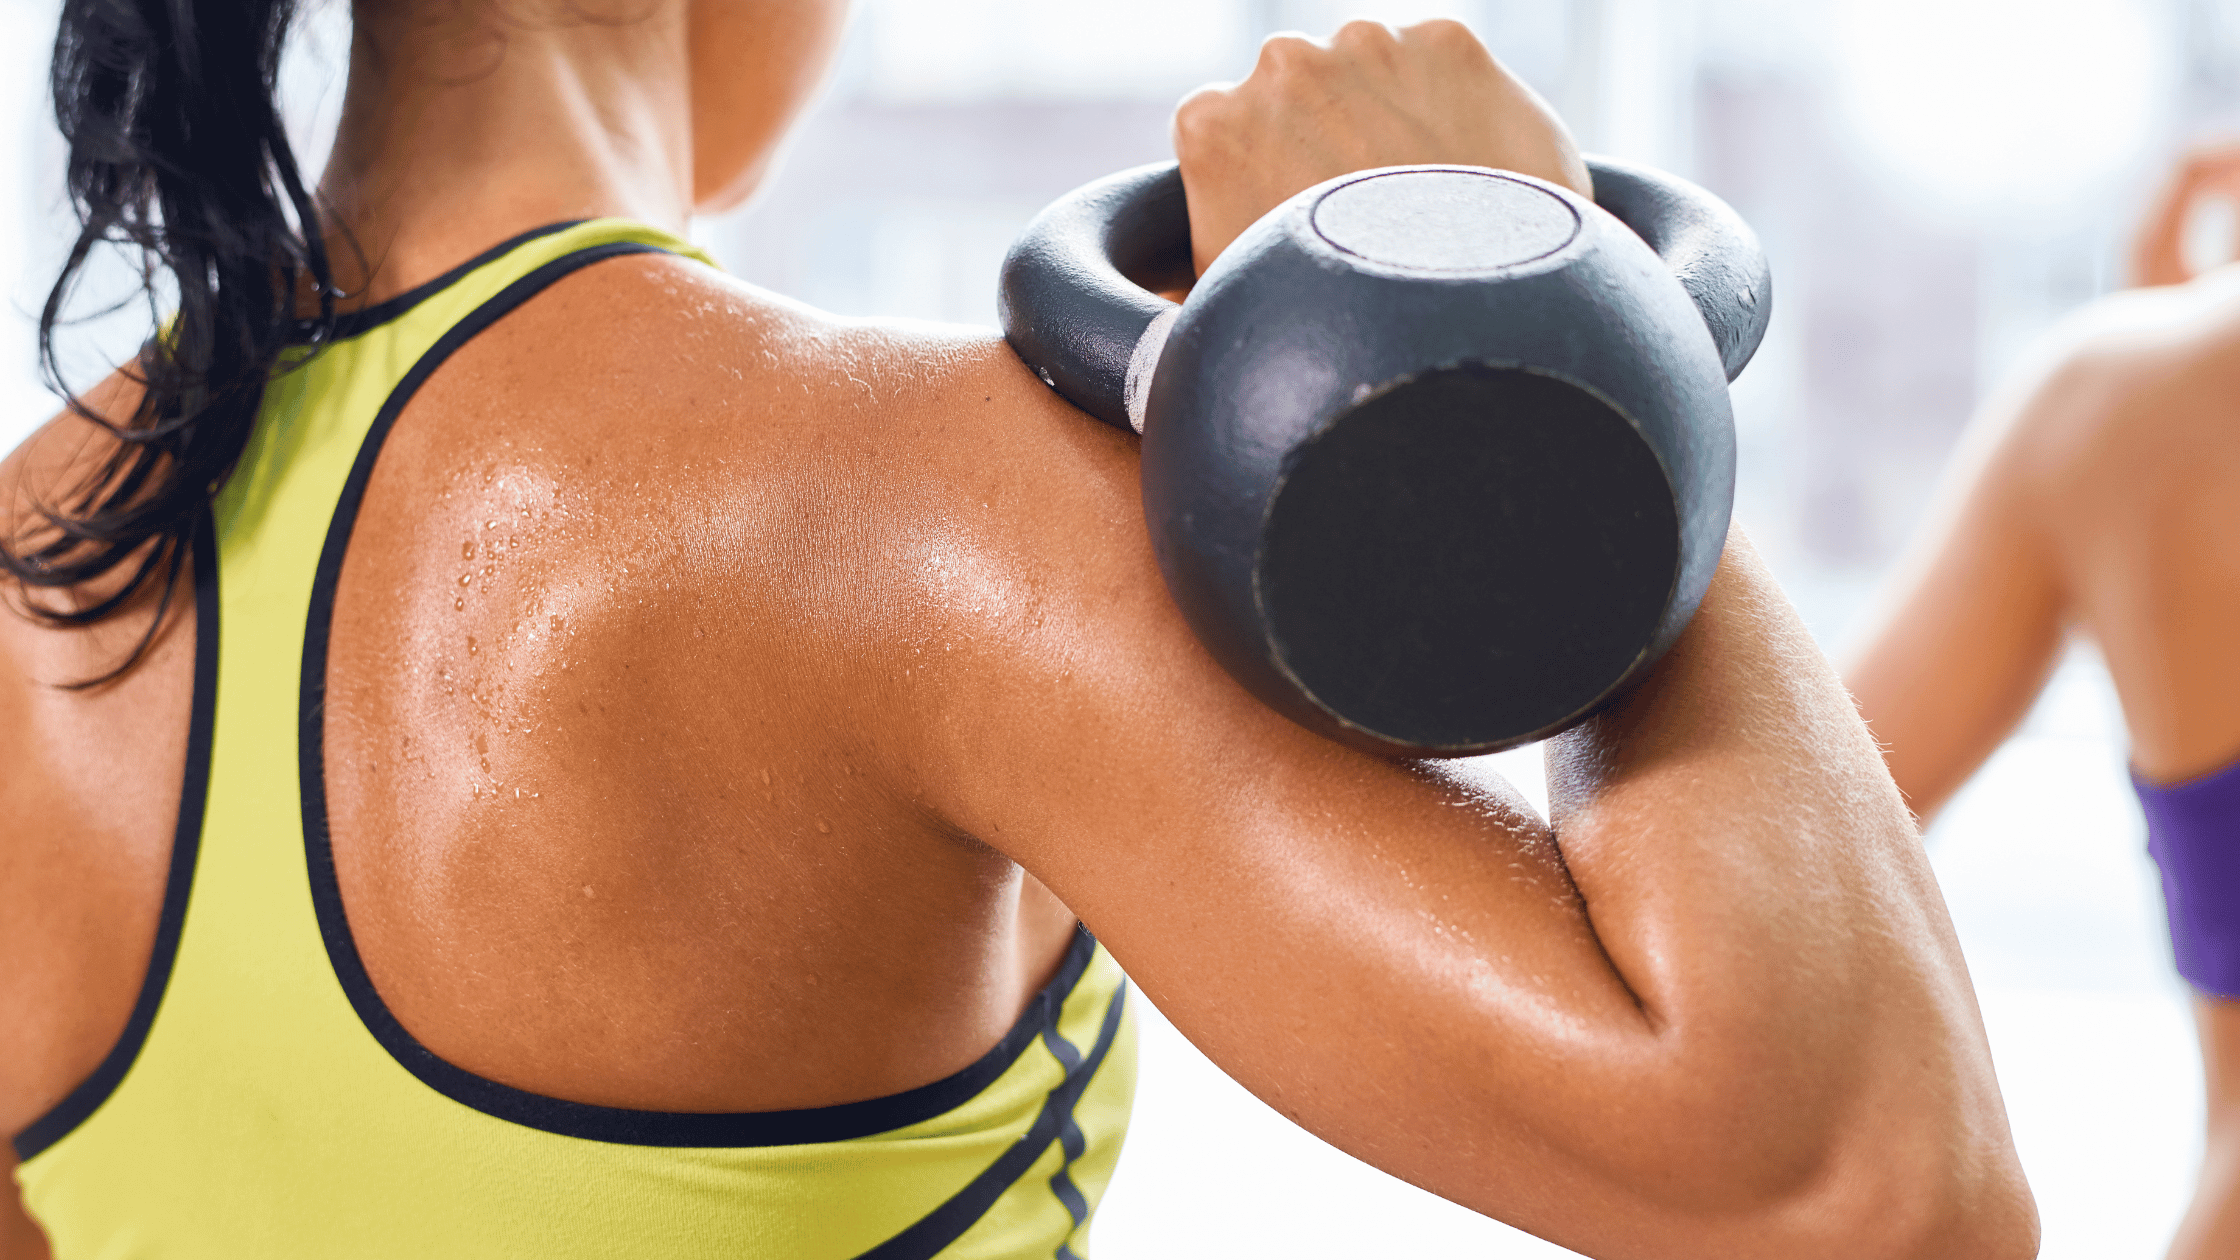 Kettlebells: A Comprehensive Guide to Their Benefits, Safety, and Use